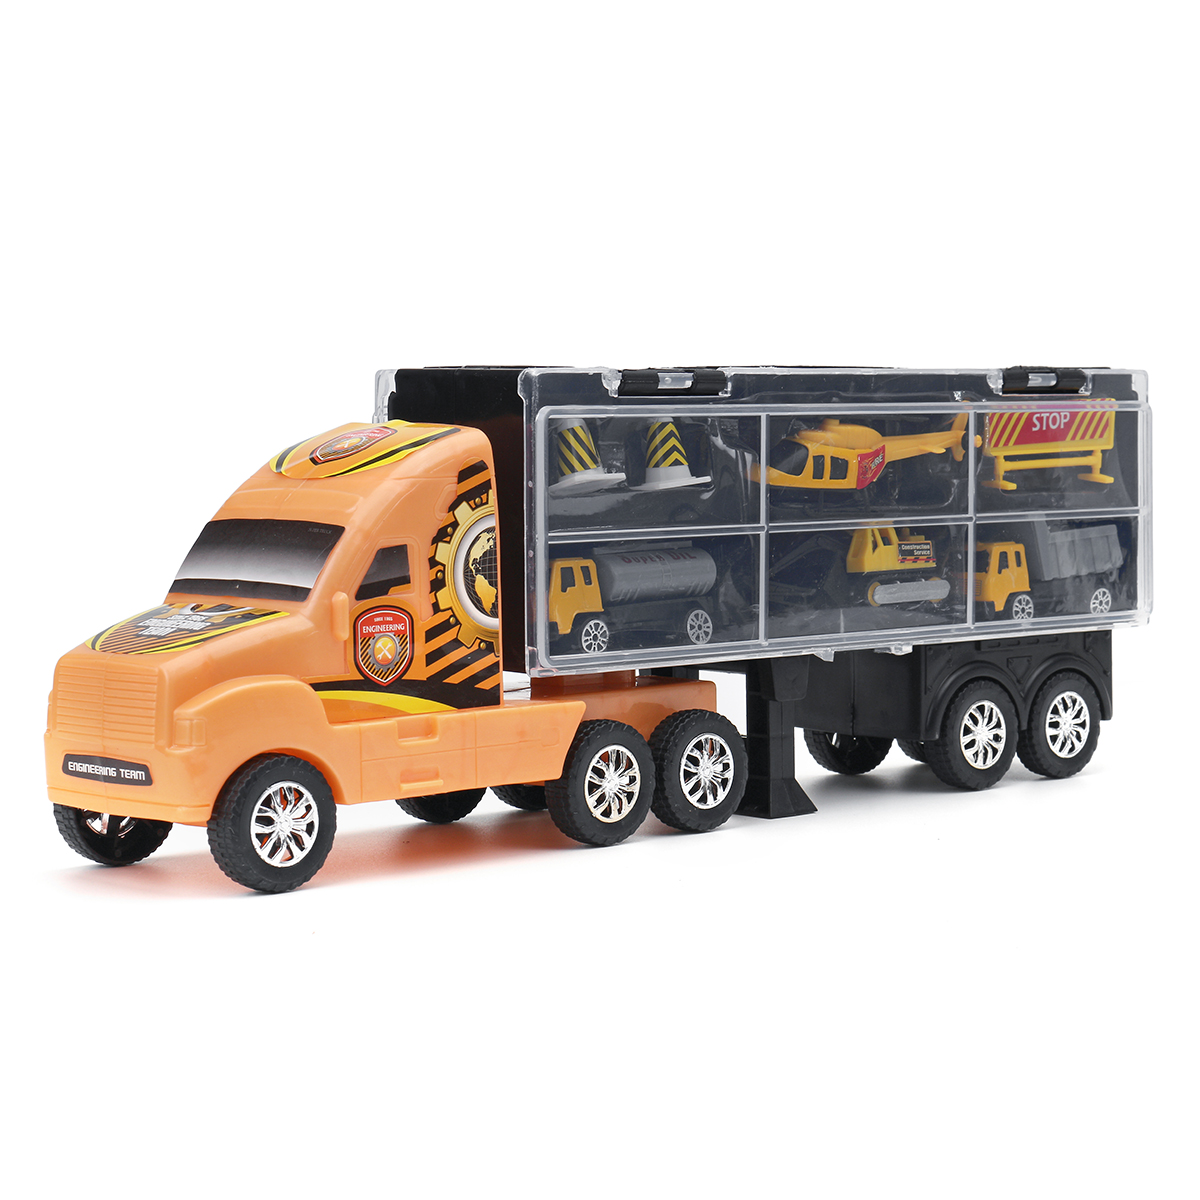 Alloy-Trailer-Container-Car-Storage-Box-Diecast-Car-Model-Set-Toy-for-Childrens-Gift-1635959-3